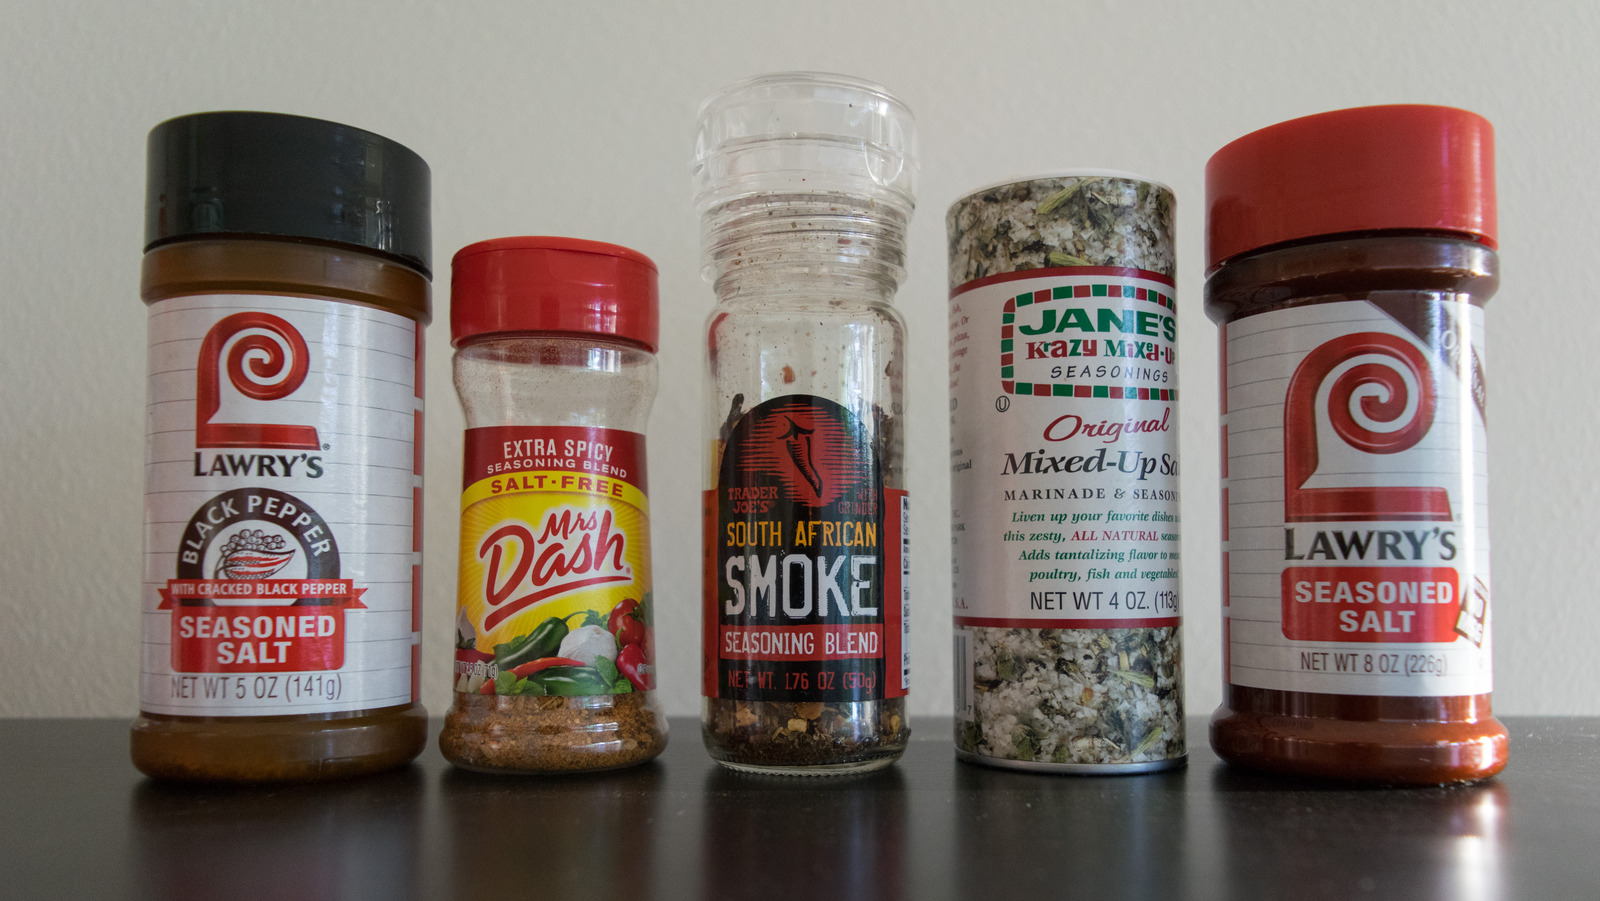 The Plastic Sifter Tops of Your Spice Jars are Useless, Take Them Off